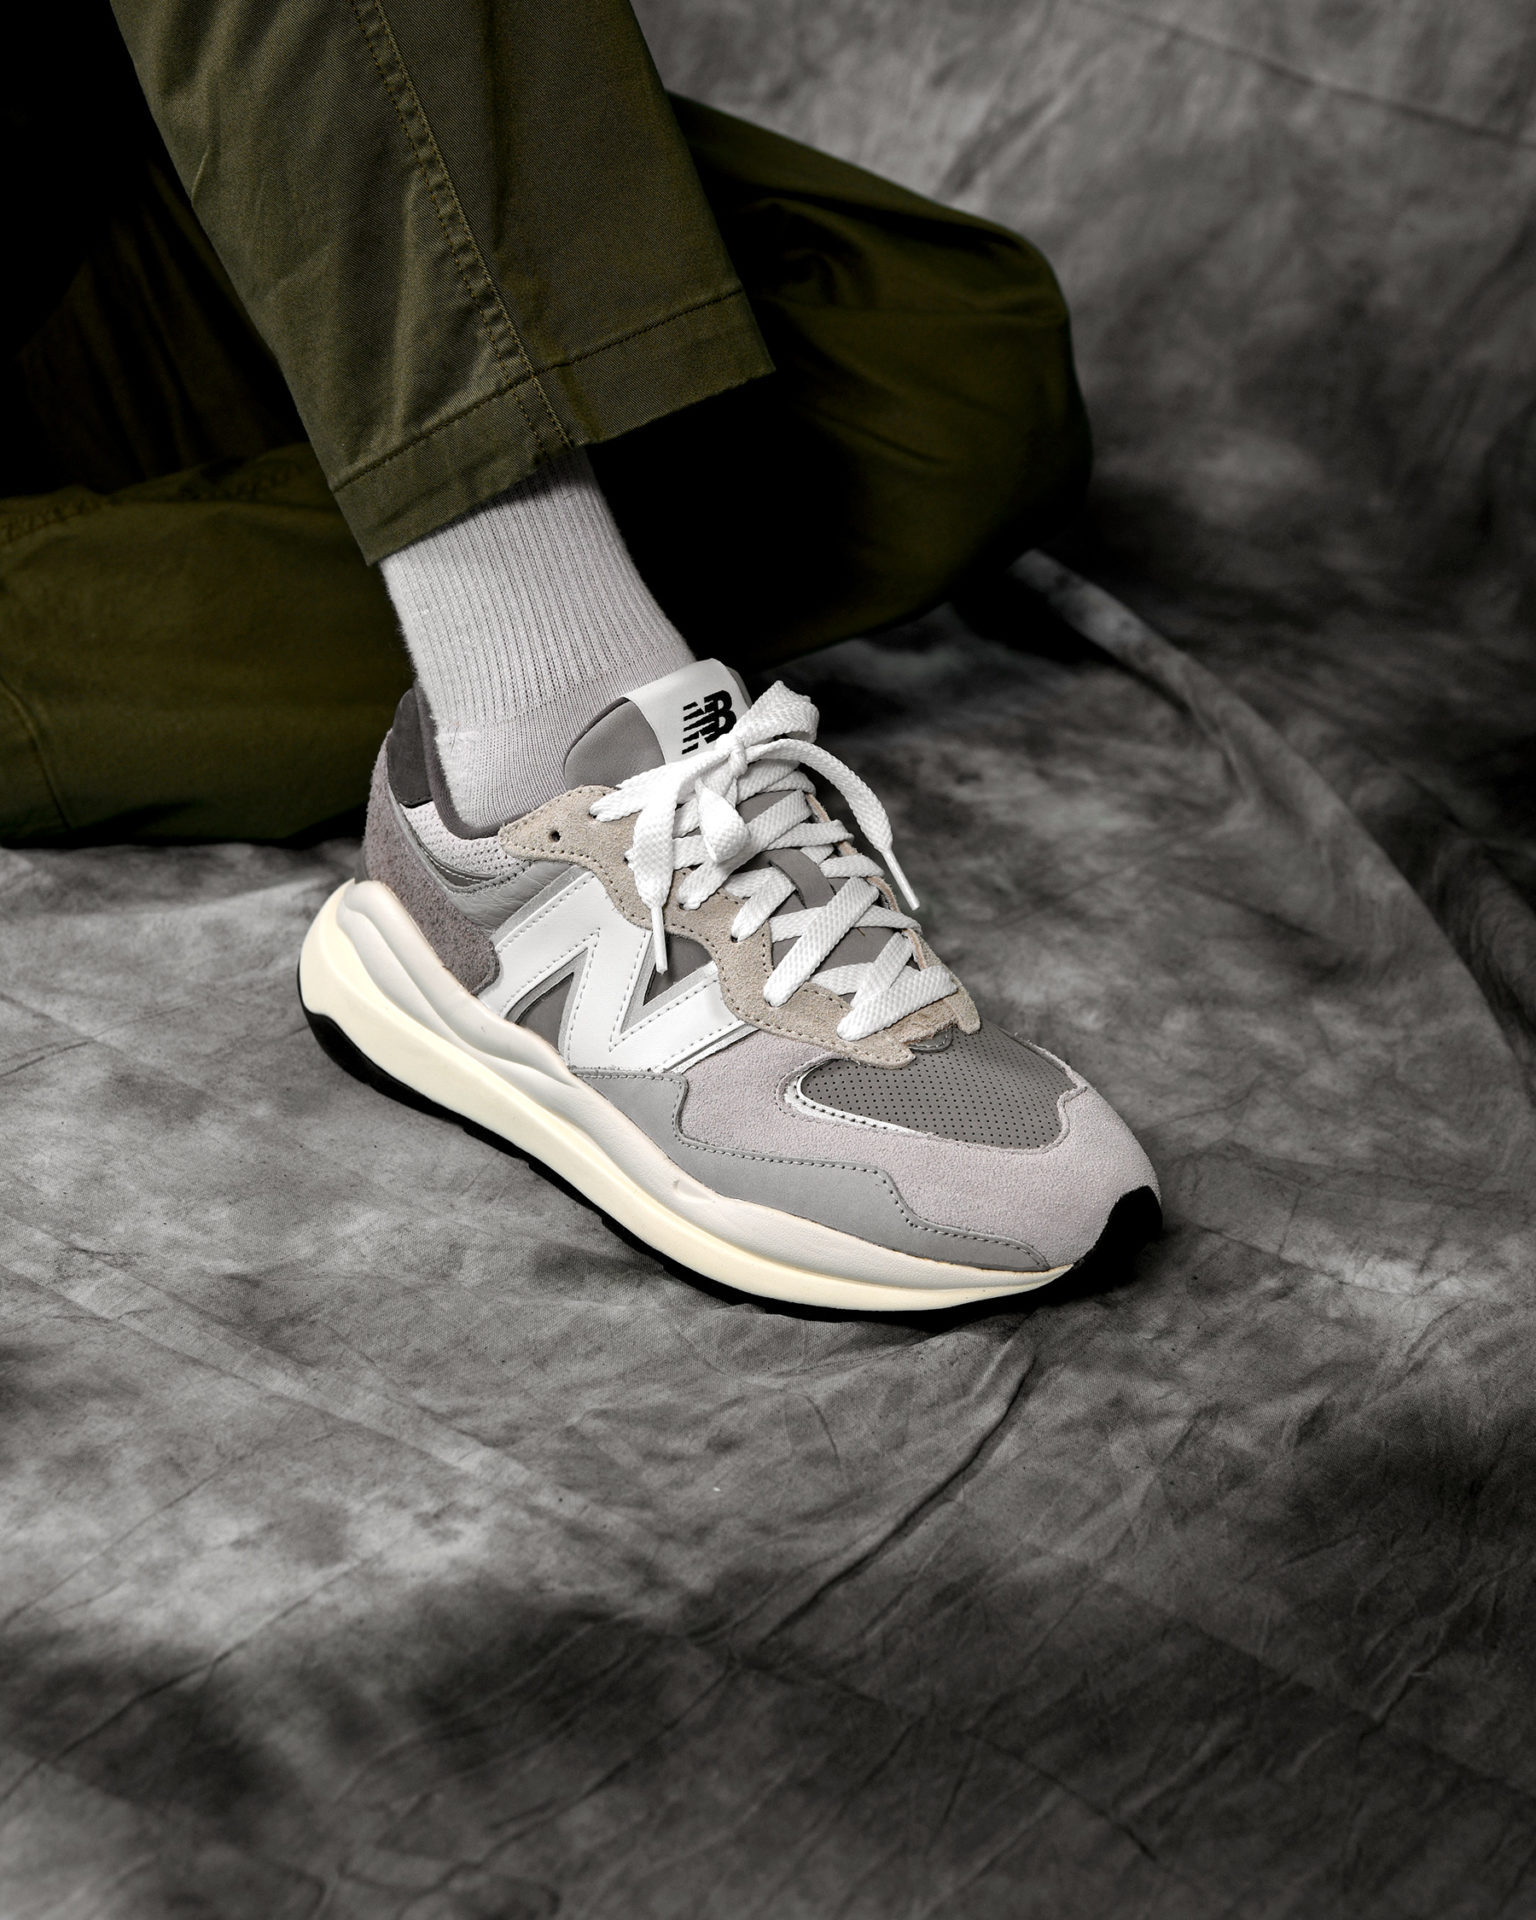 Is New Balance's 'Grey Day' 57/40 the sleeper hit of the year so far